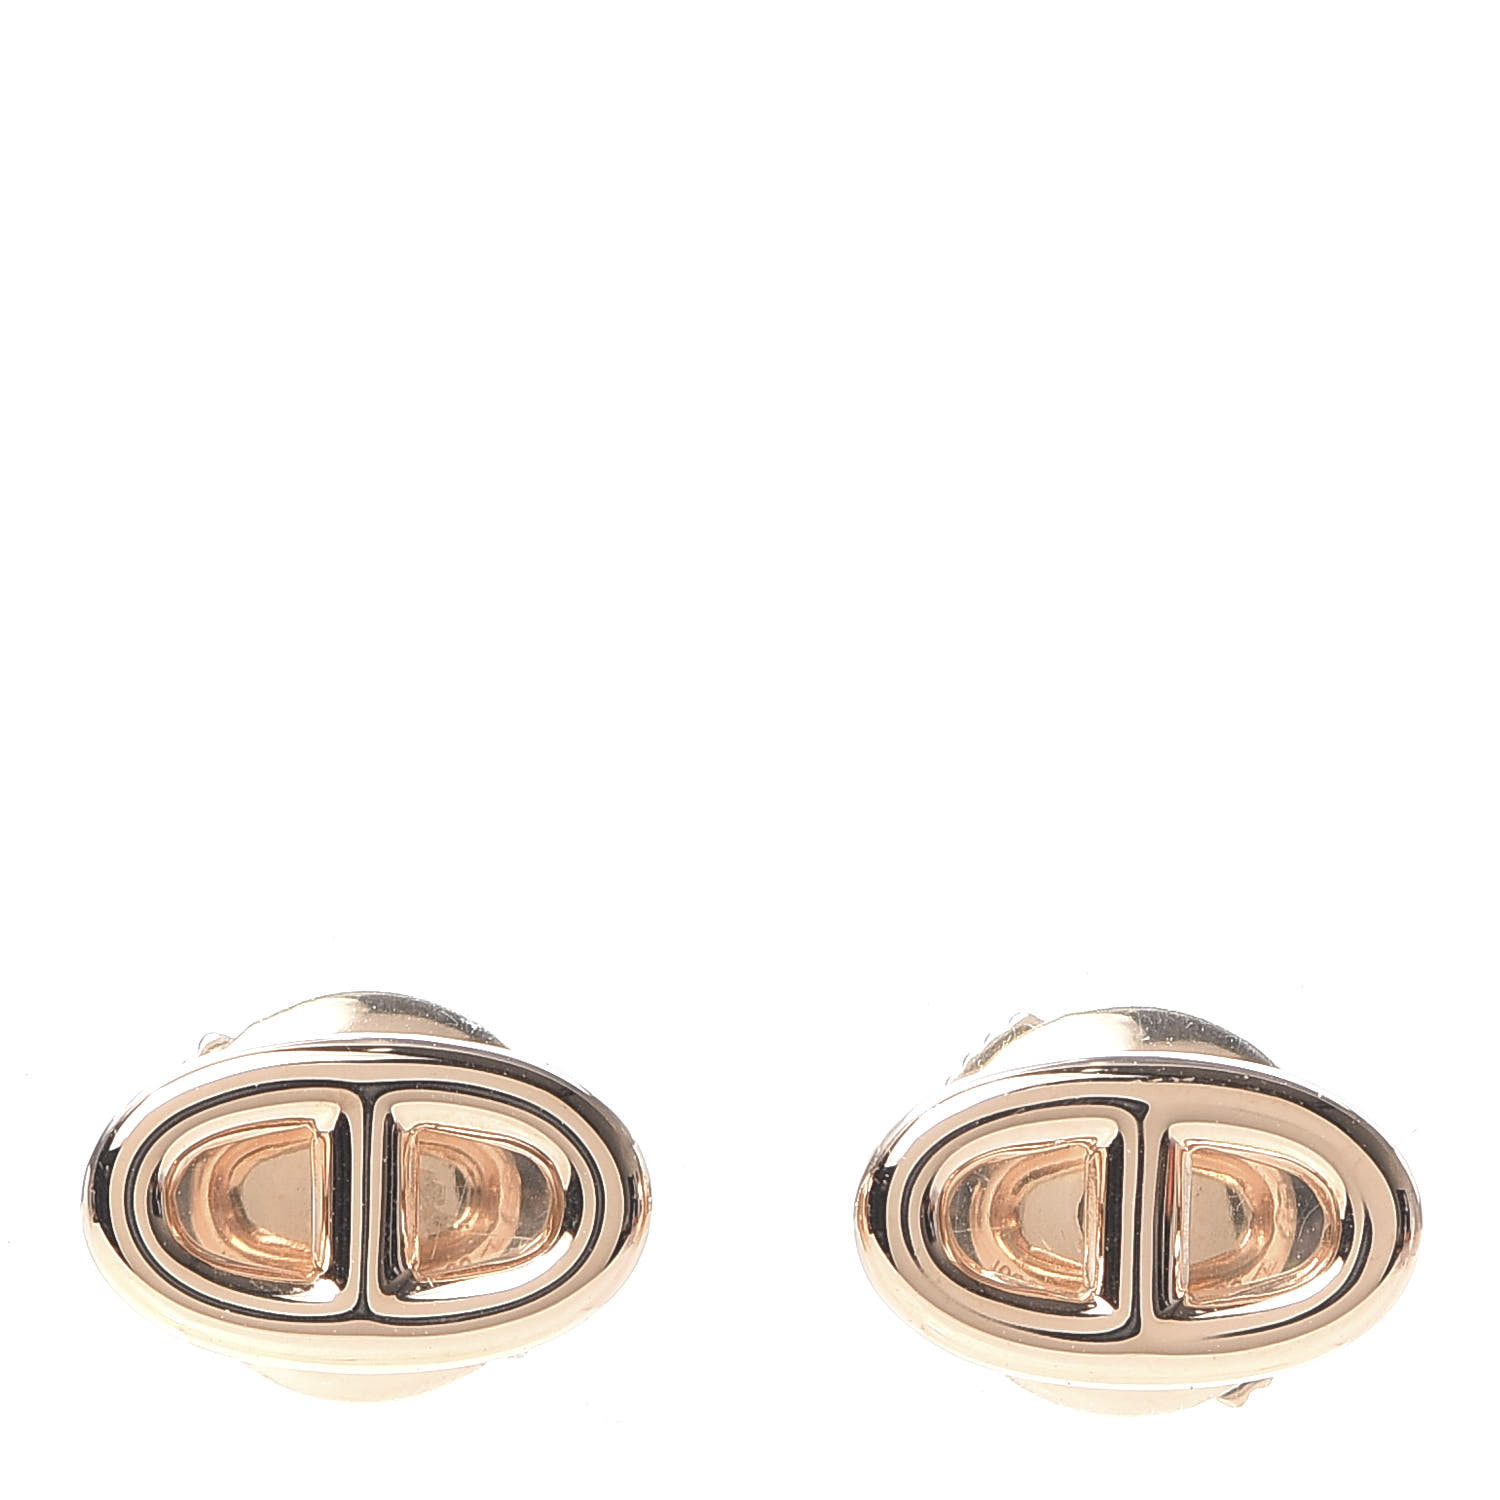 HERMES 18K Rose Gold TPM Chaine D'Ancre Stud Earrings 620815 | FASHIONPHILE